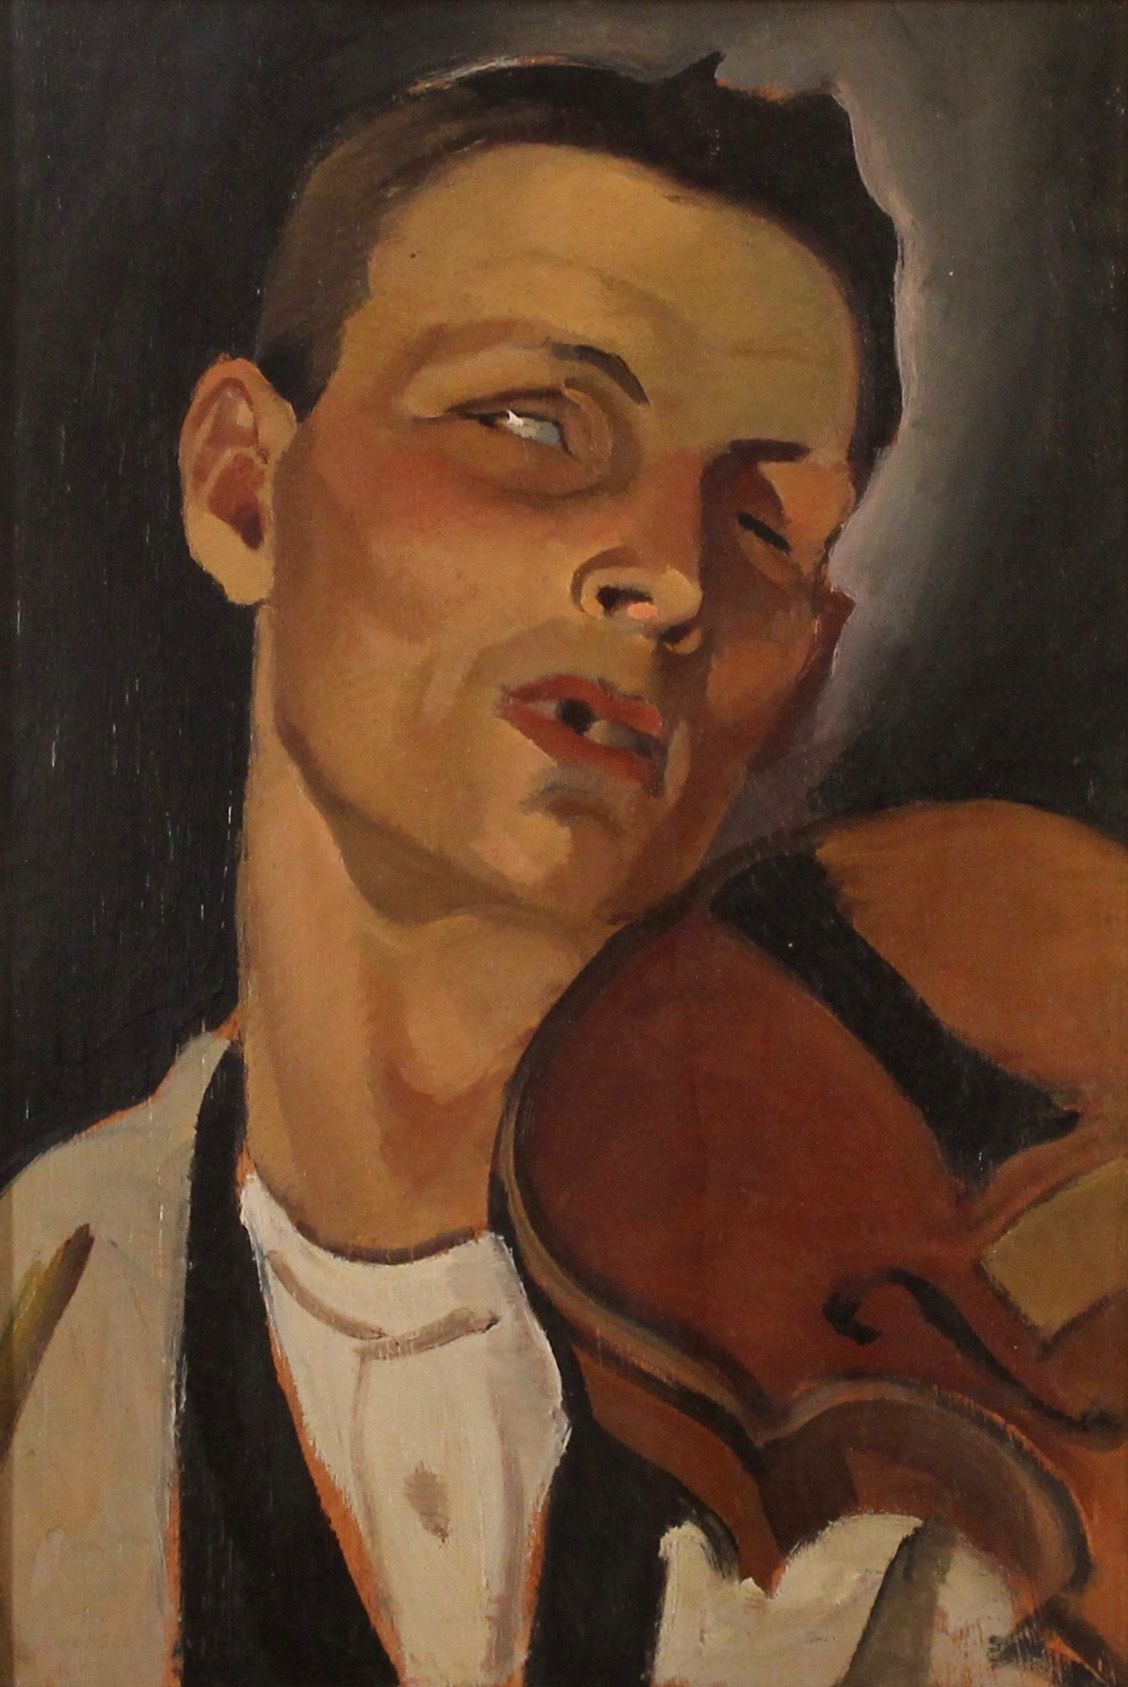 ALFONSO AMORELLI (1898/1969) "Il violinista" - "The violinist" Oil painting on p&hellip;